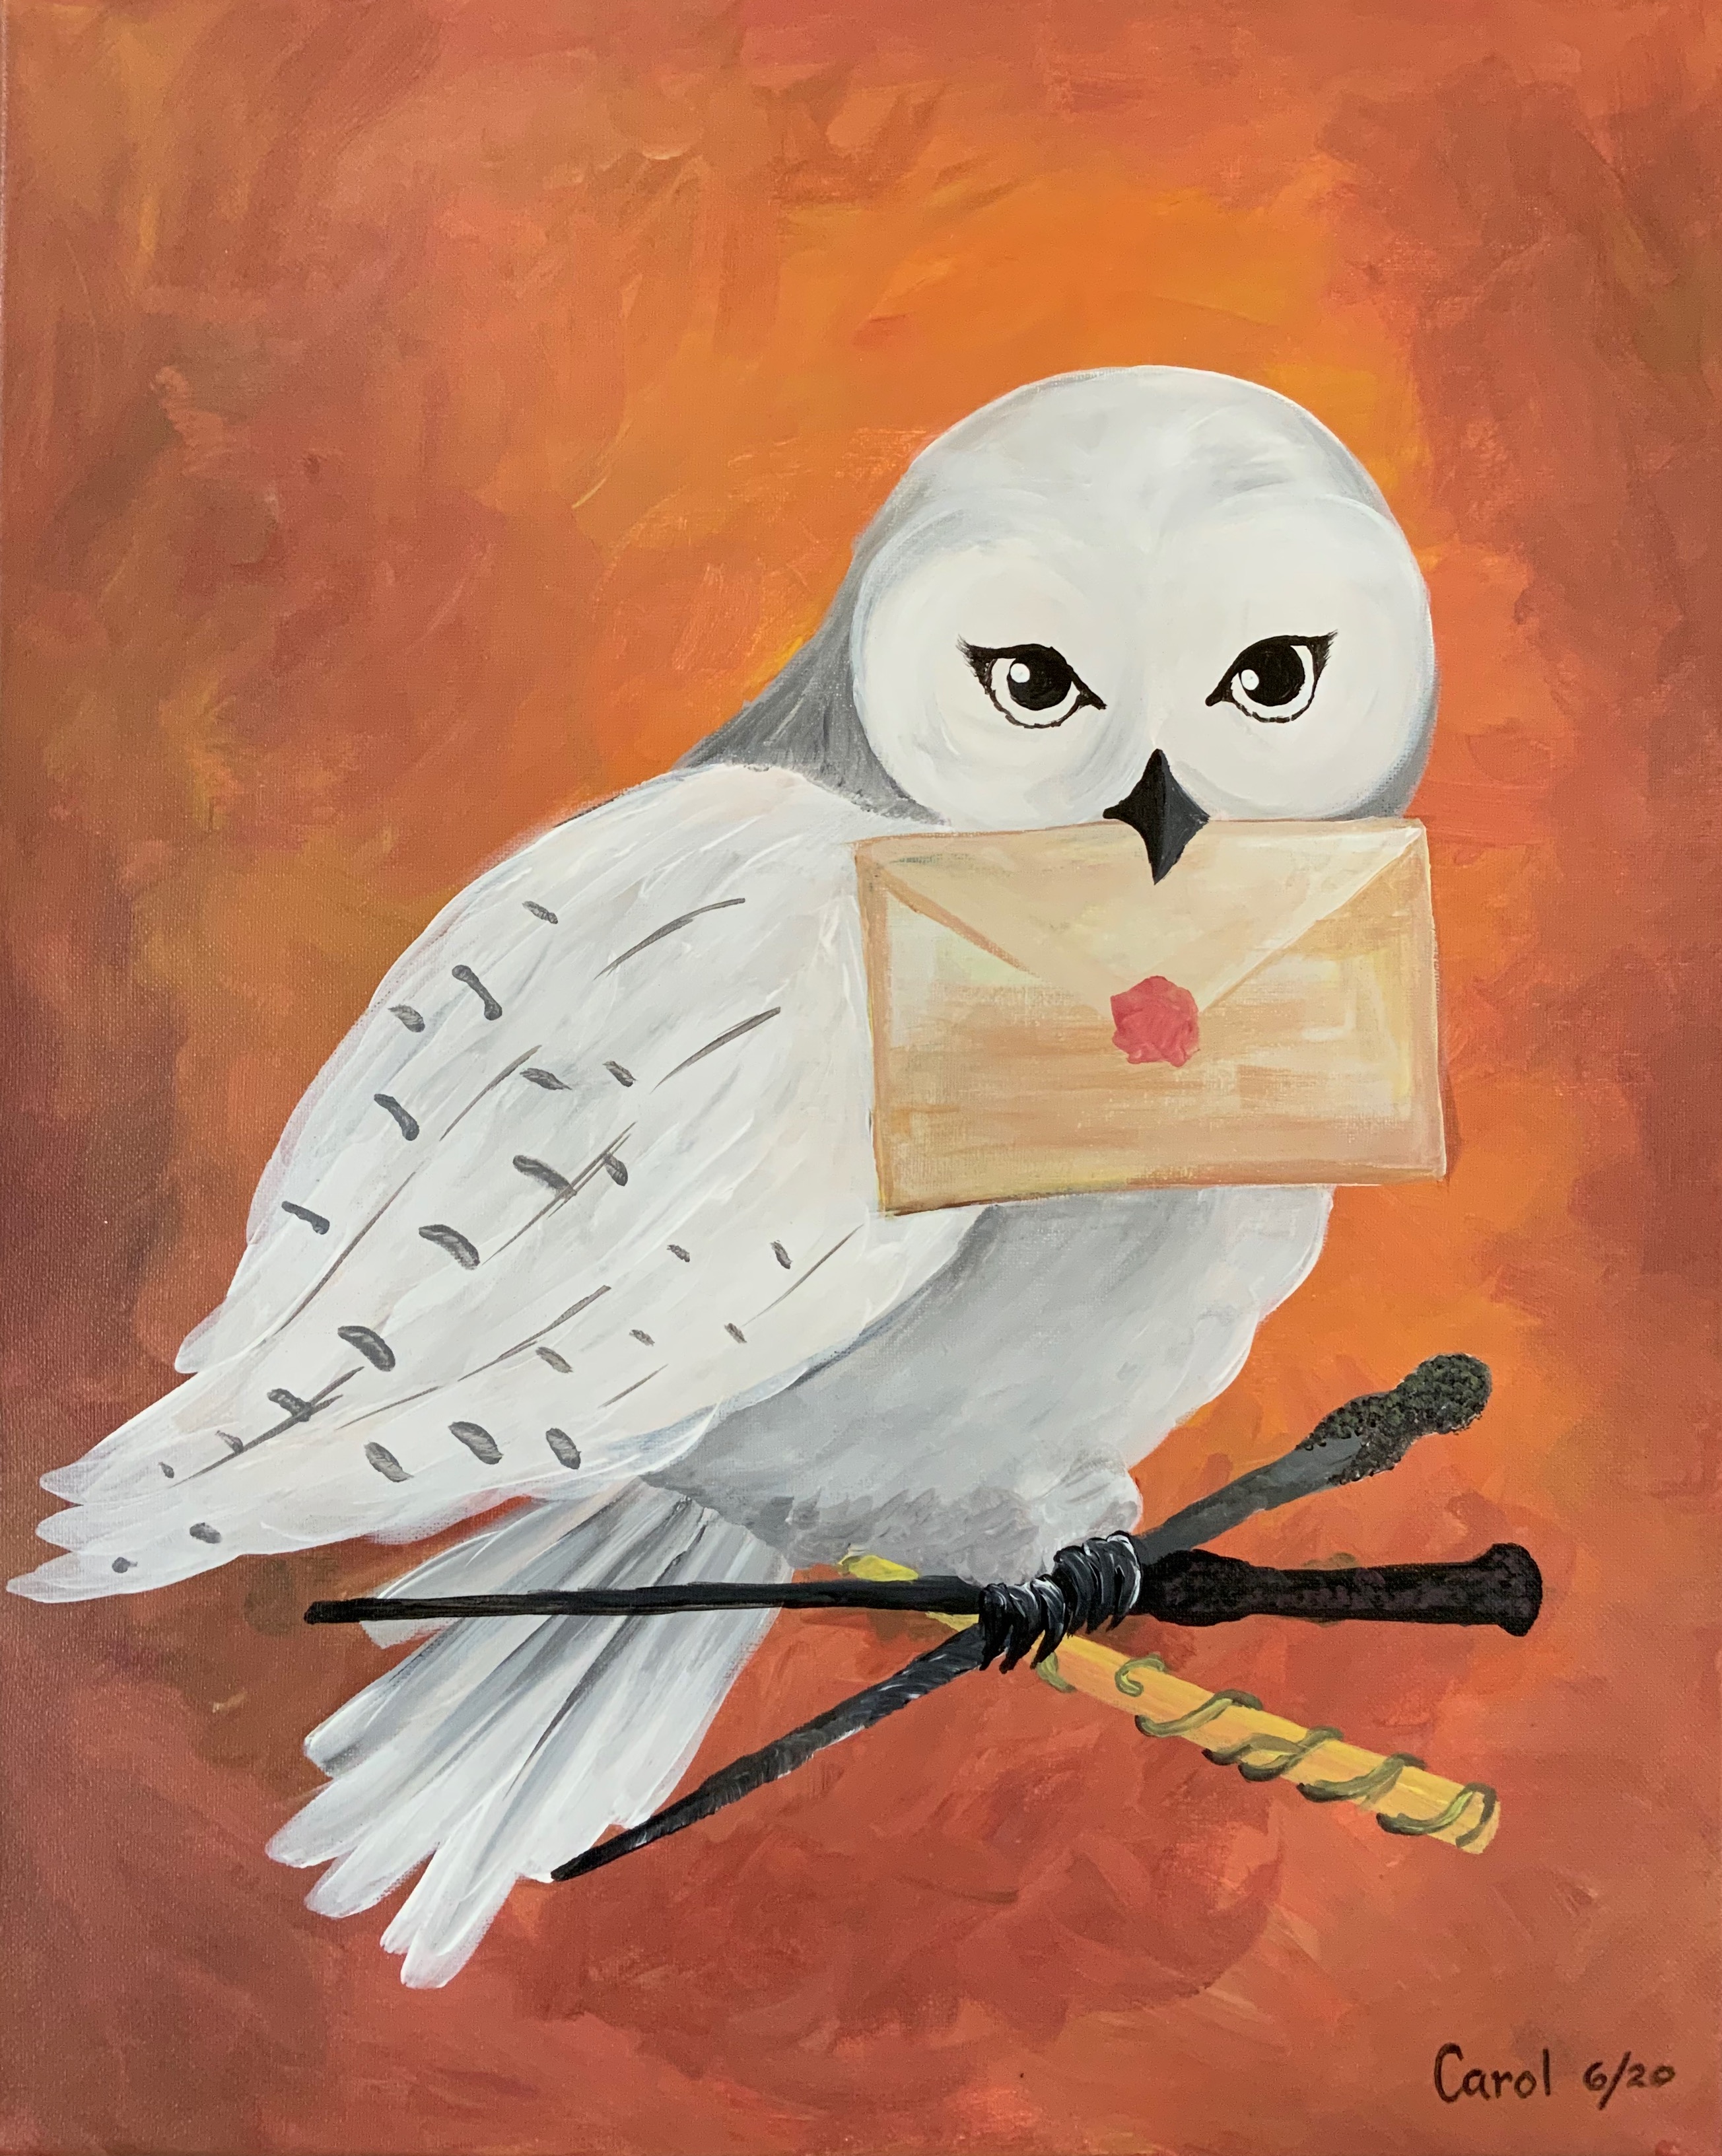 A Hedwig Harry Potters Owl experience project by Yaymaker